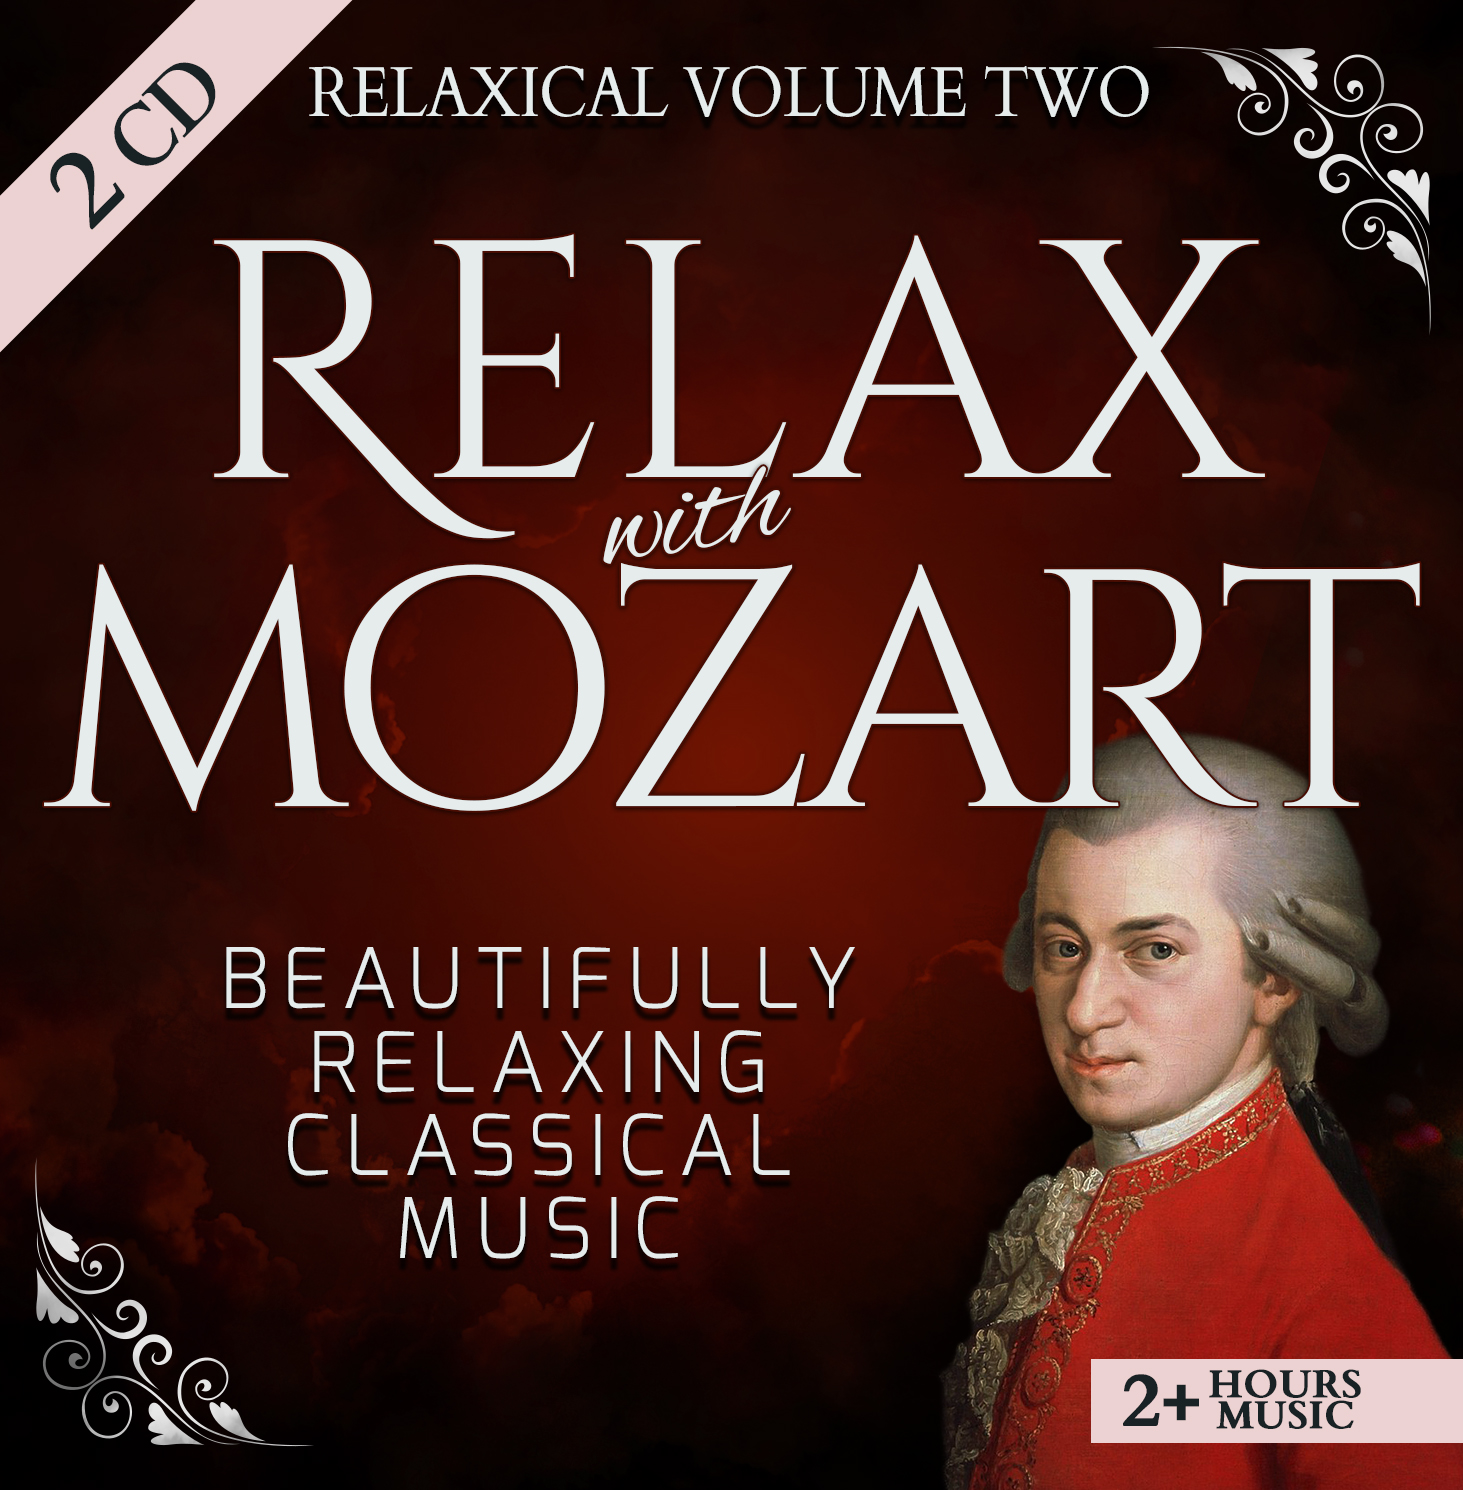 Volume 2 - Relax with Mozart: Beautifully Relaxing Classical Music